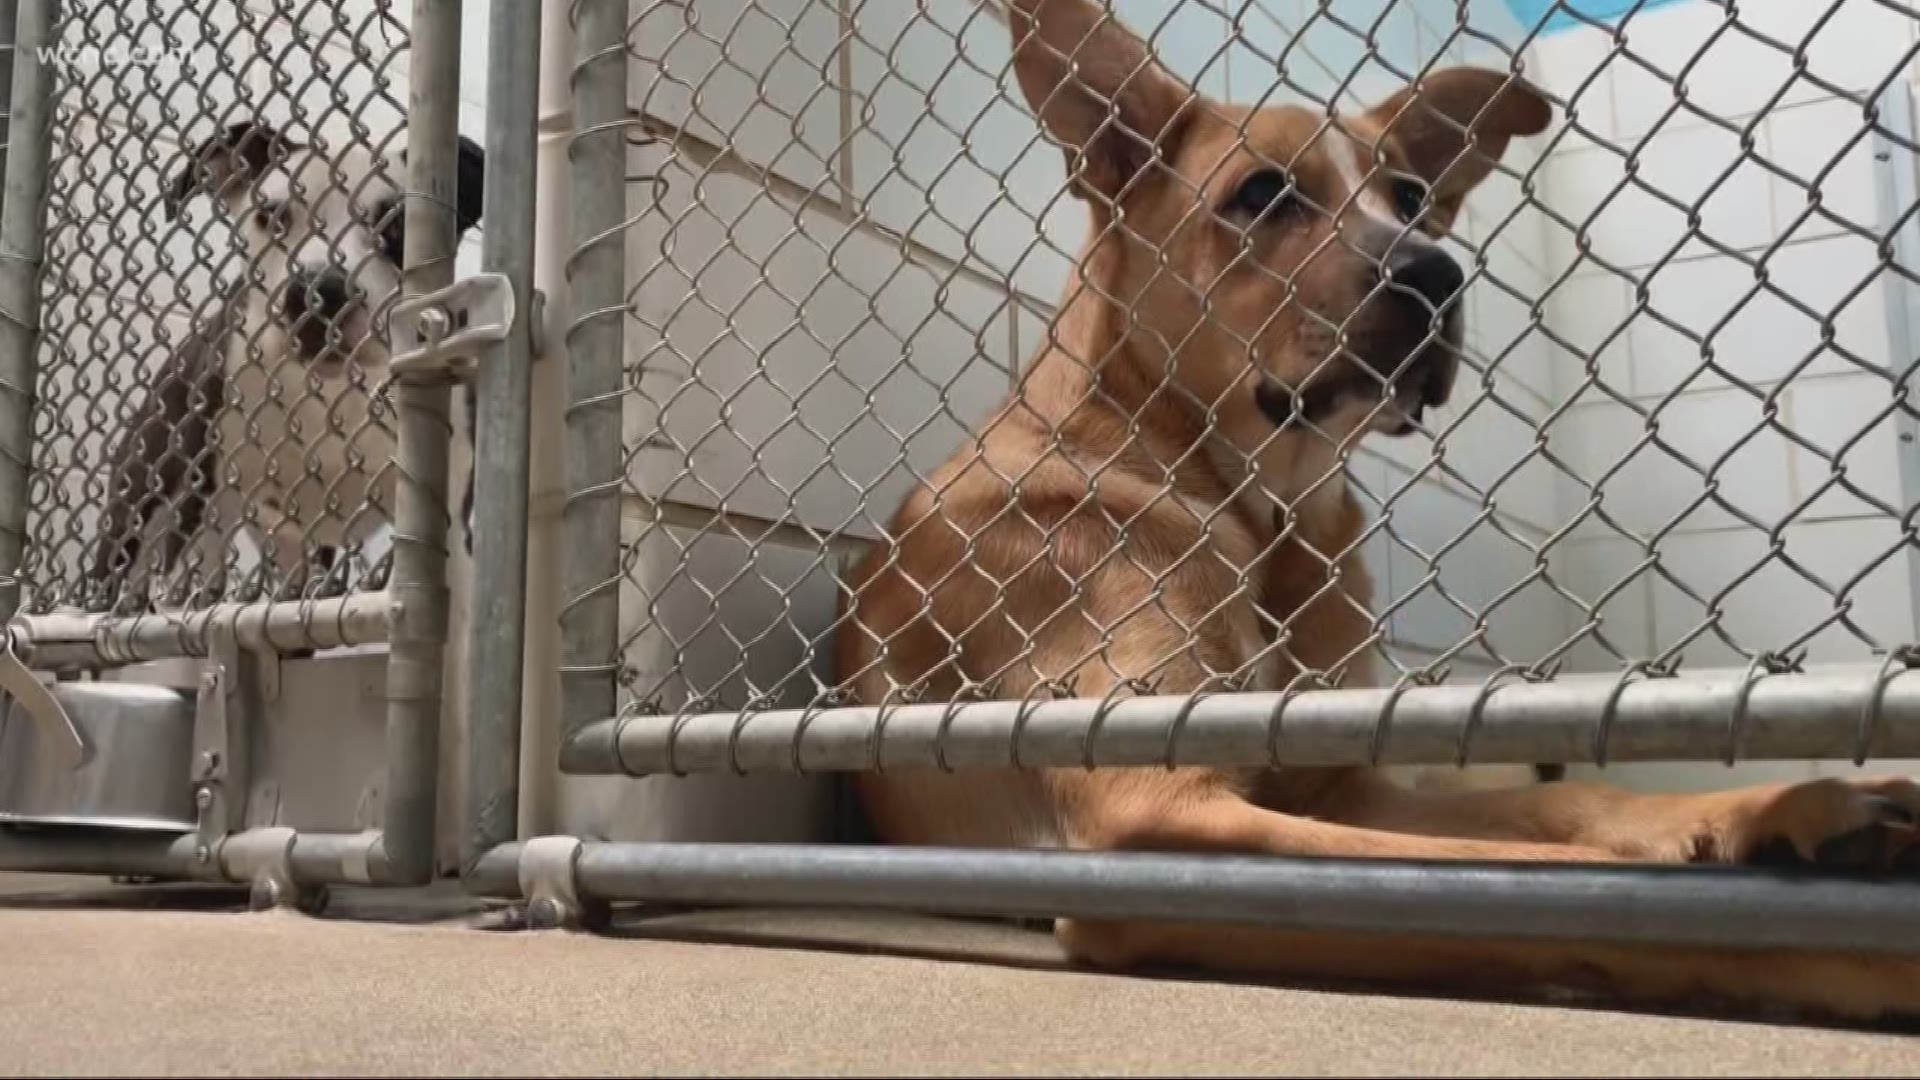 Animal shelter starts 'staycation' program to give dogs a break from kennel  